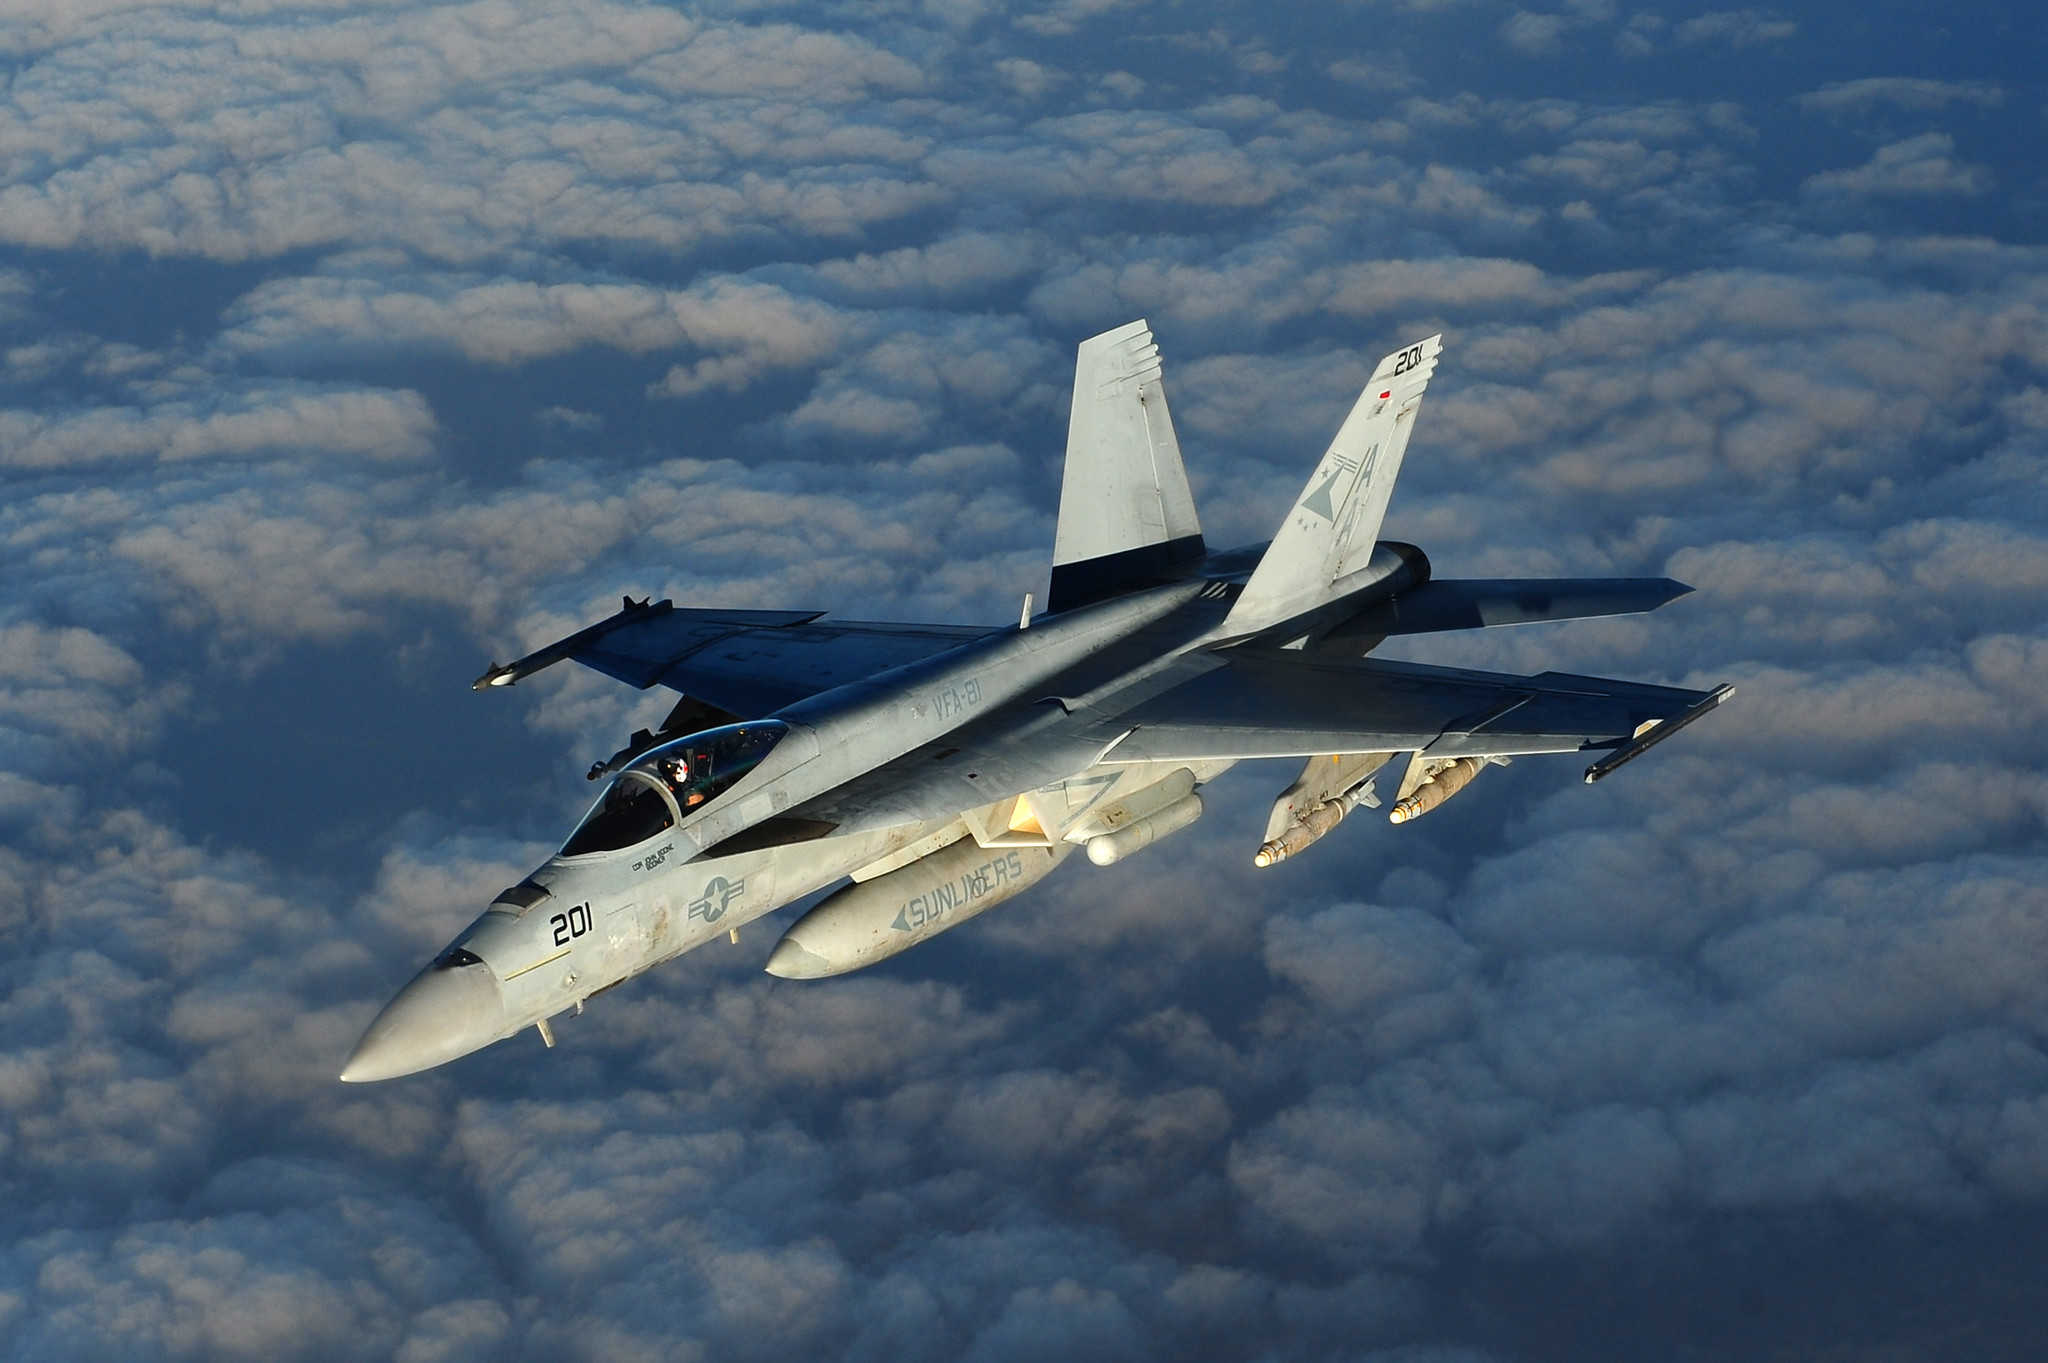 A Navy Boeing F/A-18 "Super Hornet", assigned to the USS Carl Vinson, returns to its mission after being refueled by an Air Force Boeing KC-135 "Stratotanker" assigned to the 340th Expeditionary Air Refueling Squadron in the skies above Afghanistan in support of Operation Enduring Freedom, Mar. 2, 2011.